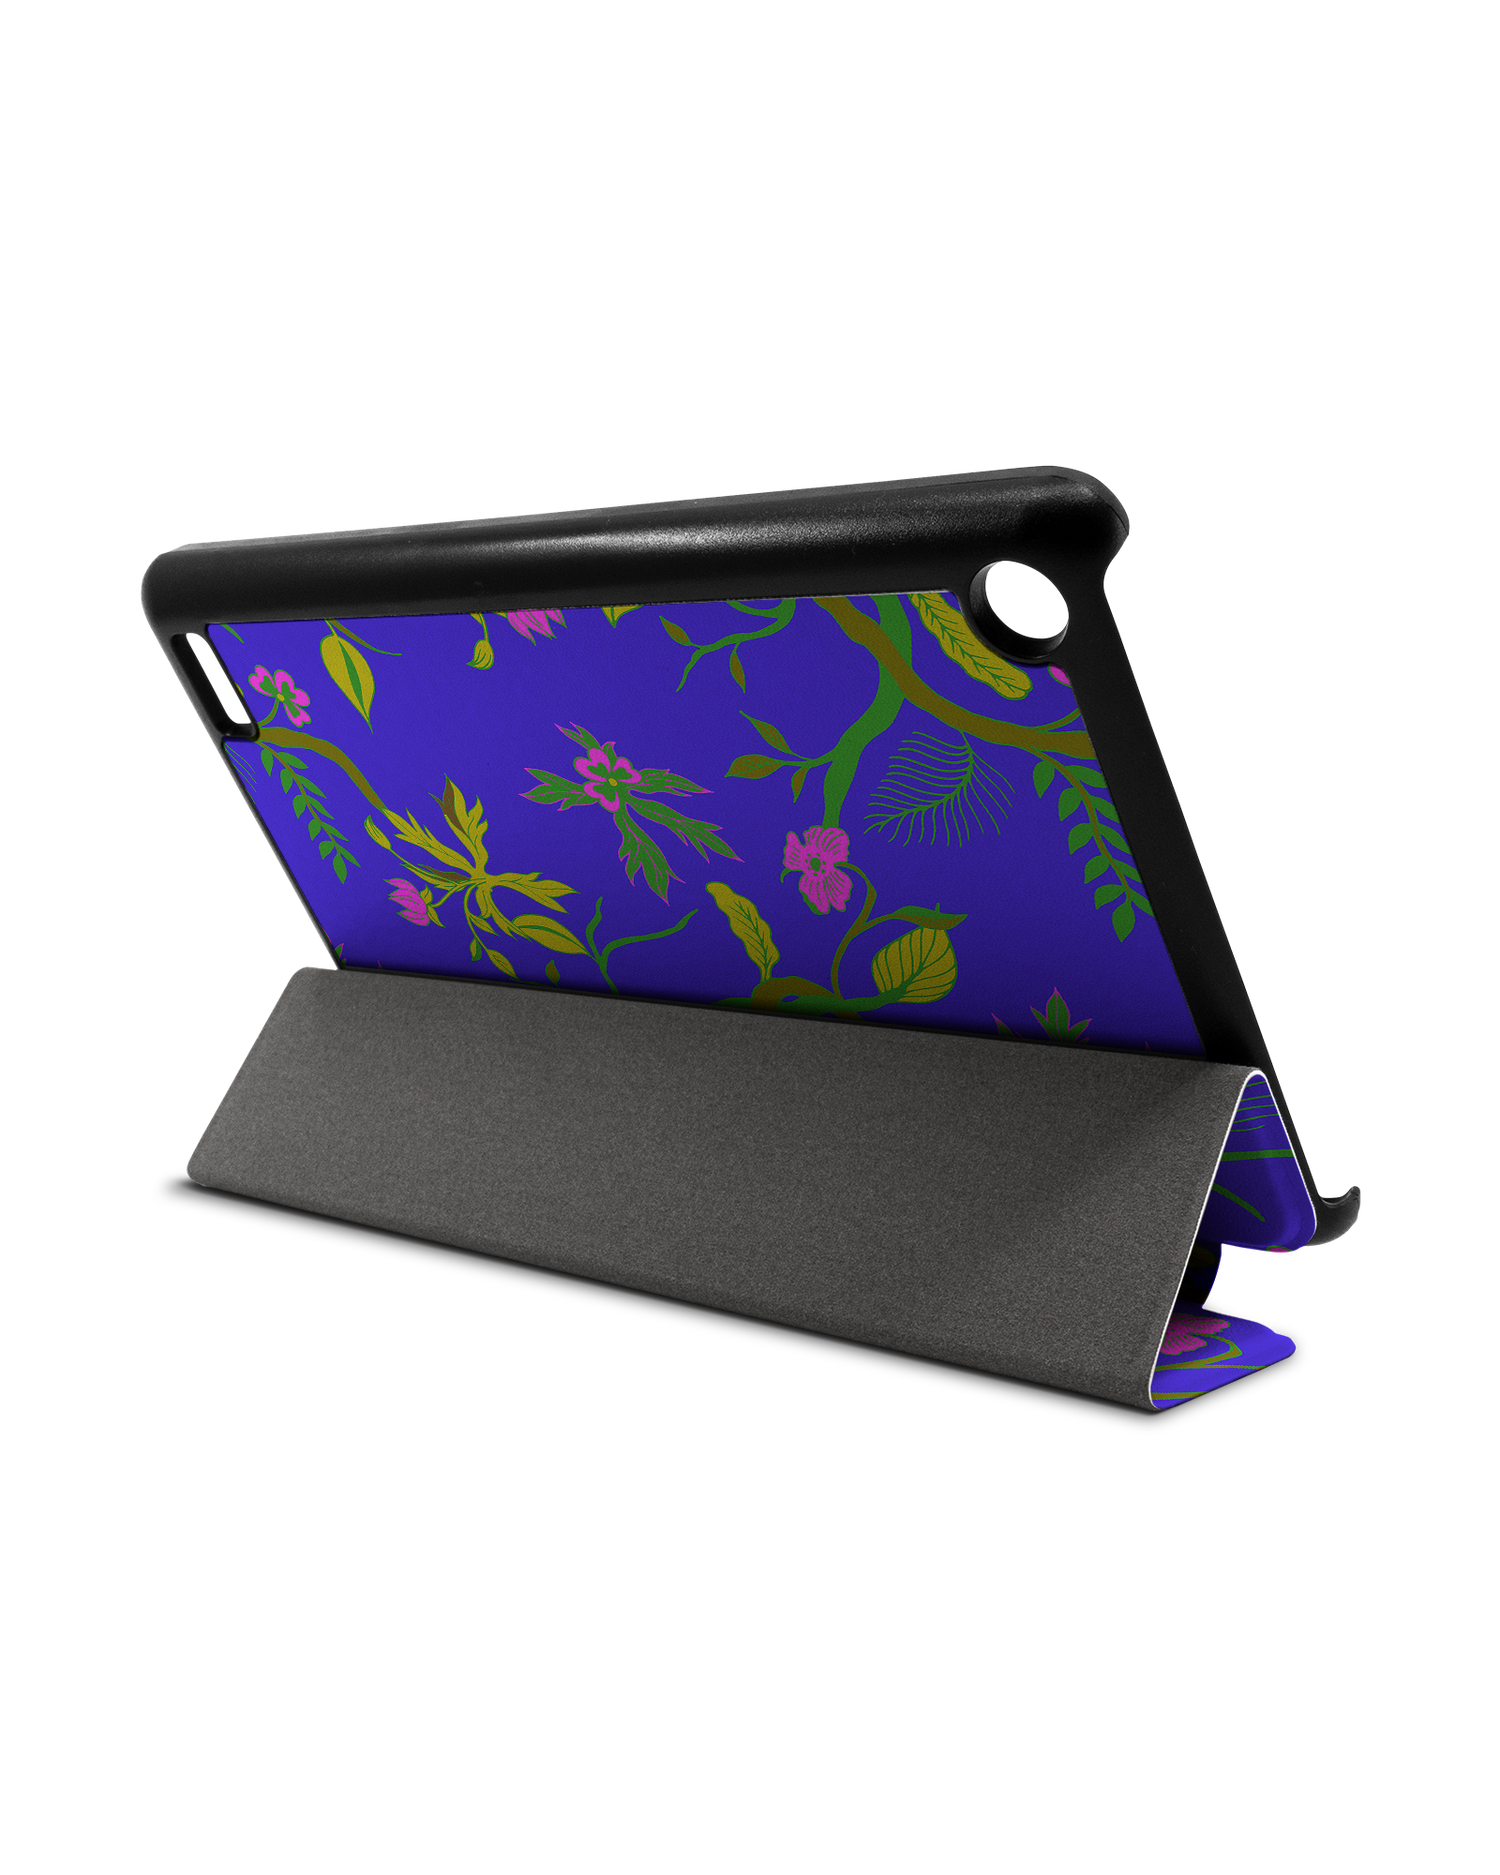 Ultra Violet Floral Tablet Smart Case for Amazon Fire 7: Used as Stand